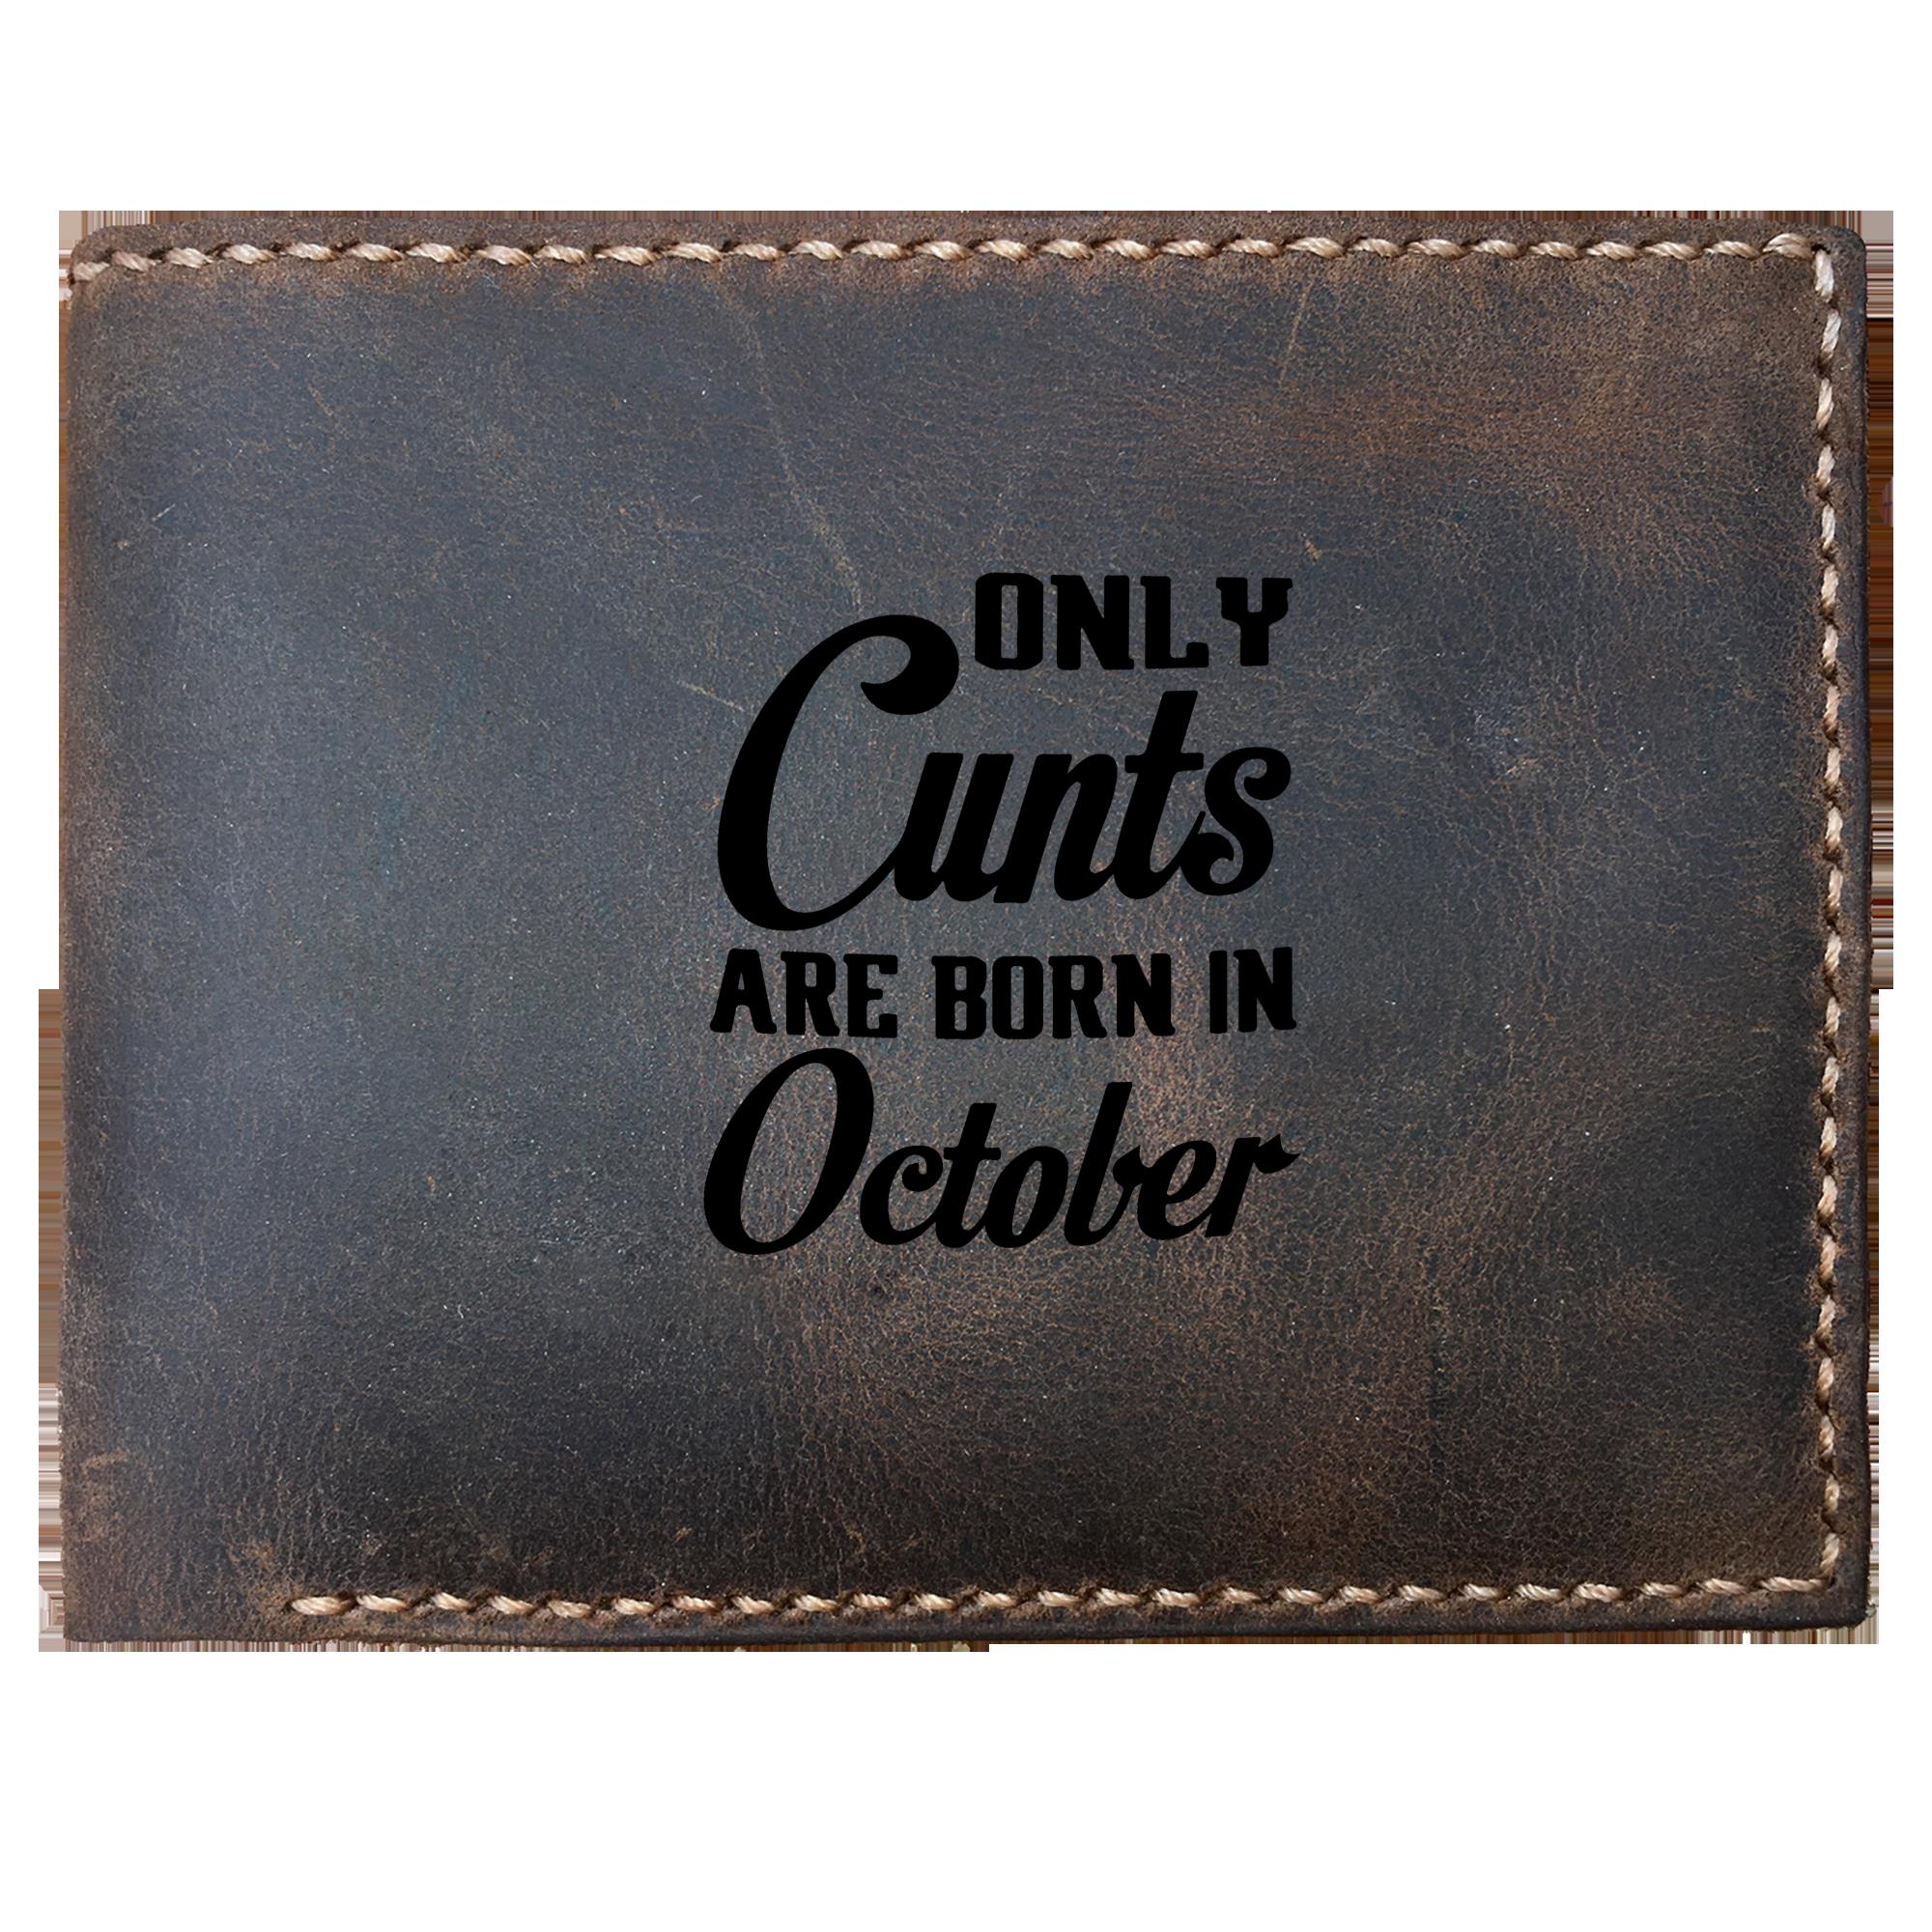 Skitongifts Funny Custom Laser Engraved Bifold Leather Wallet For Men, Only Cunts Are Born In October Happy Birthday Funny